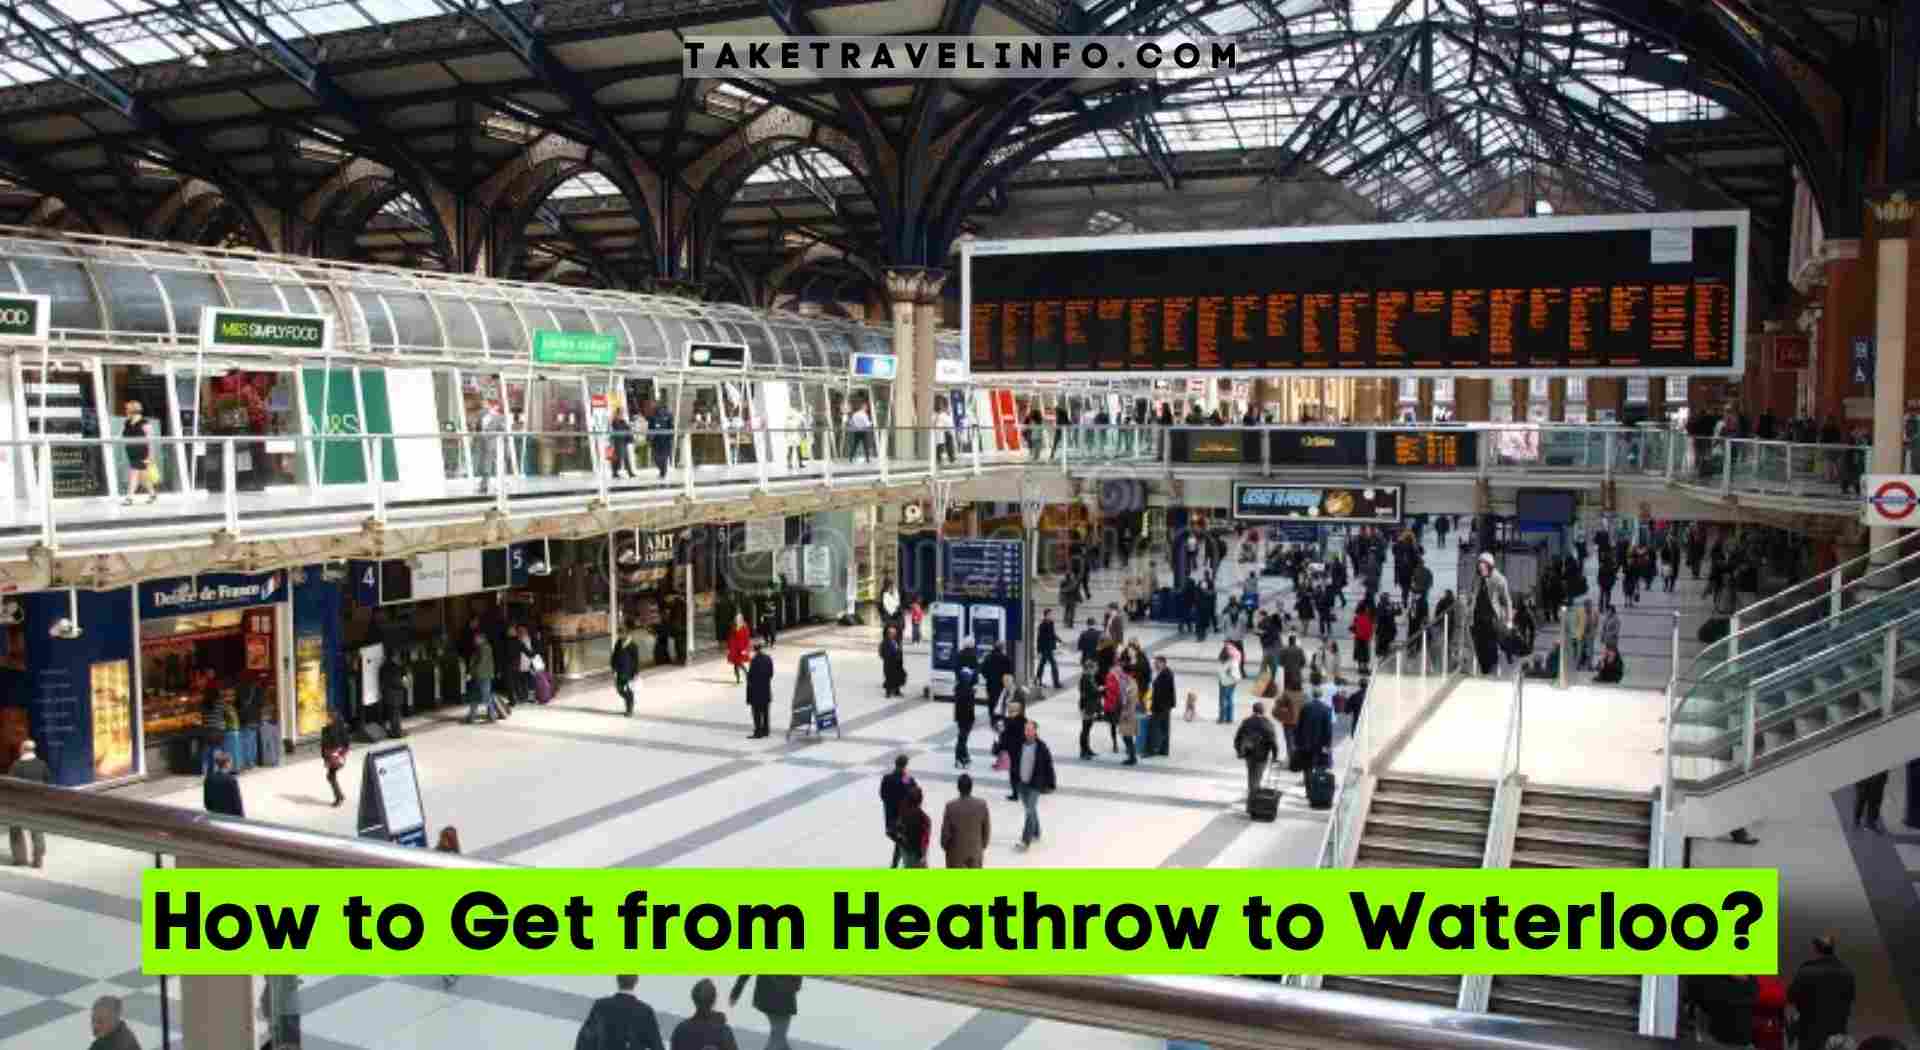 How to Get from Heathrow to Waterloo